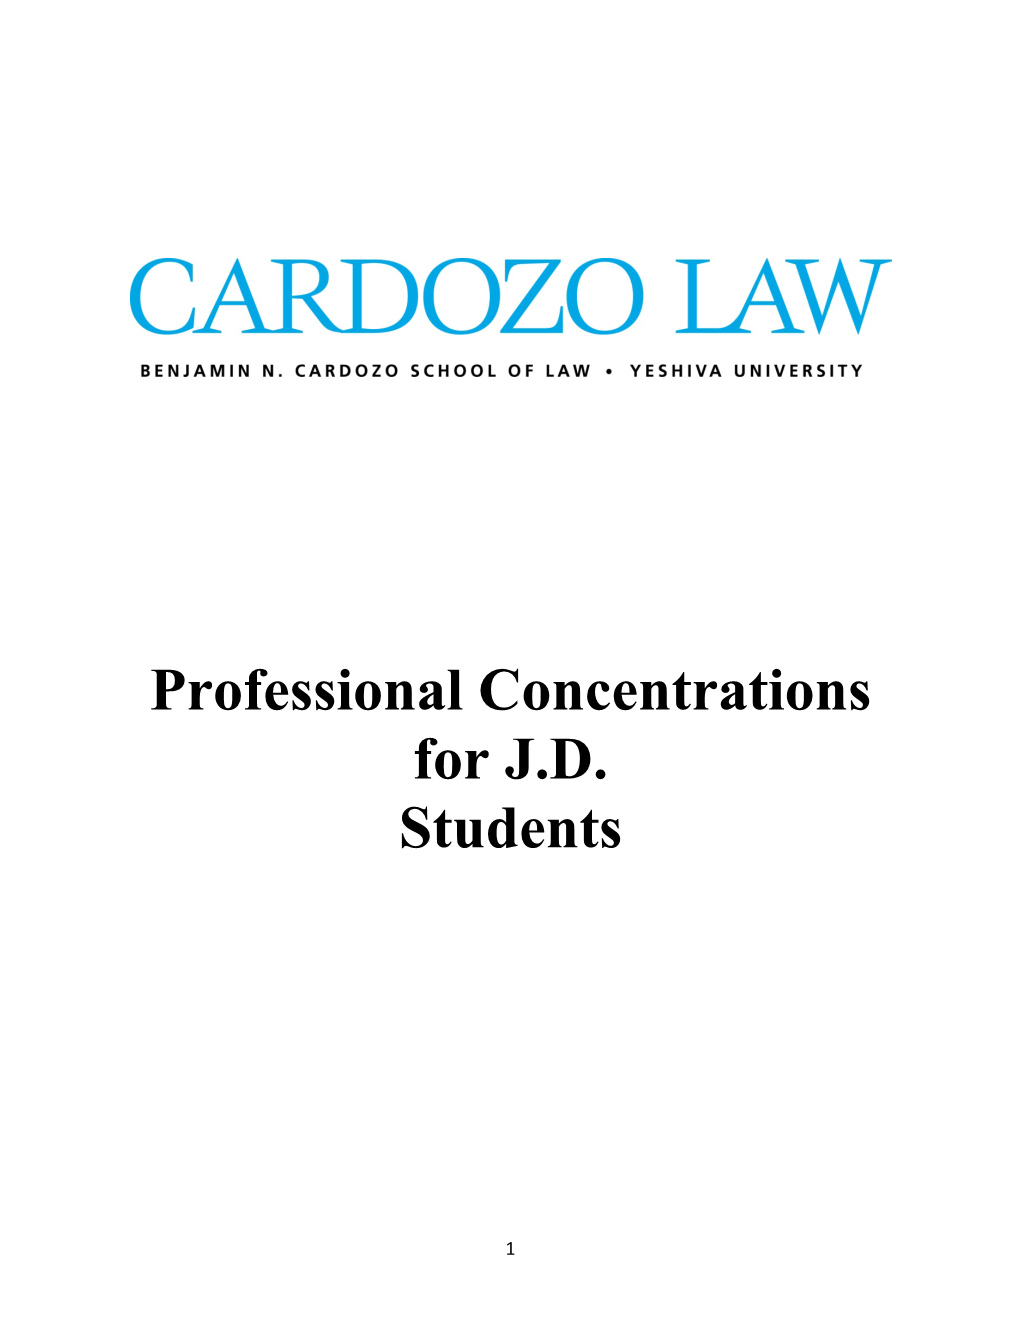 Professional Concentrations for J.D. Students